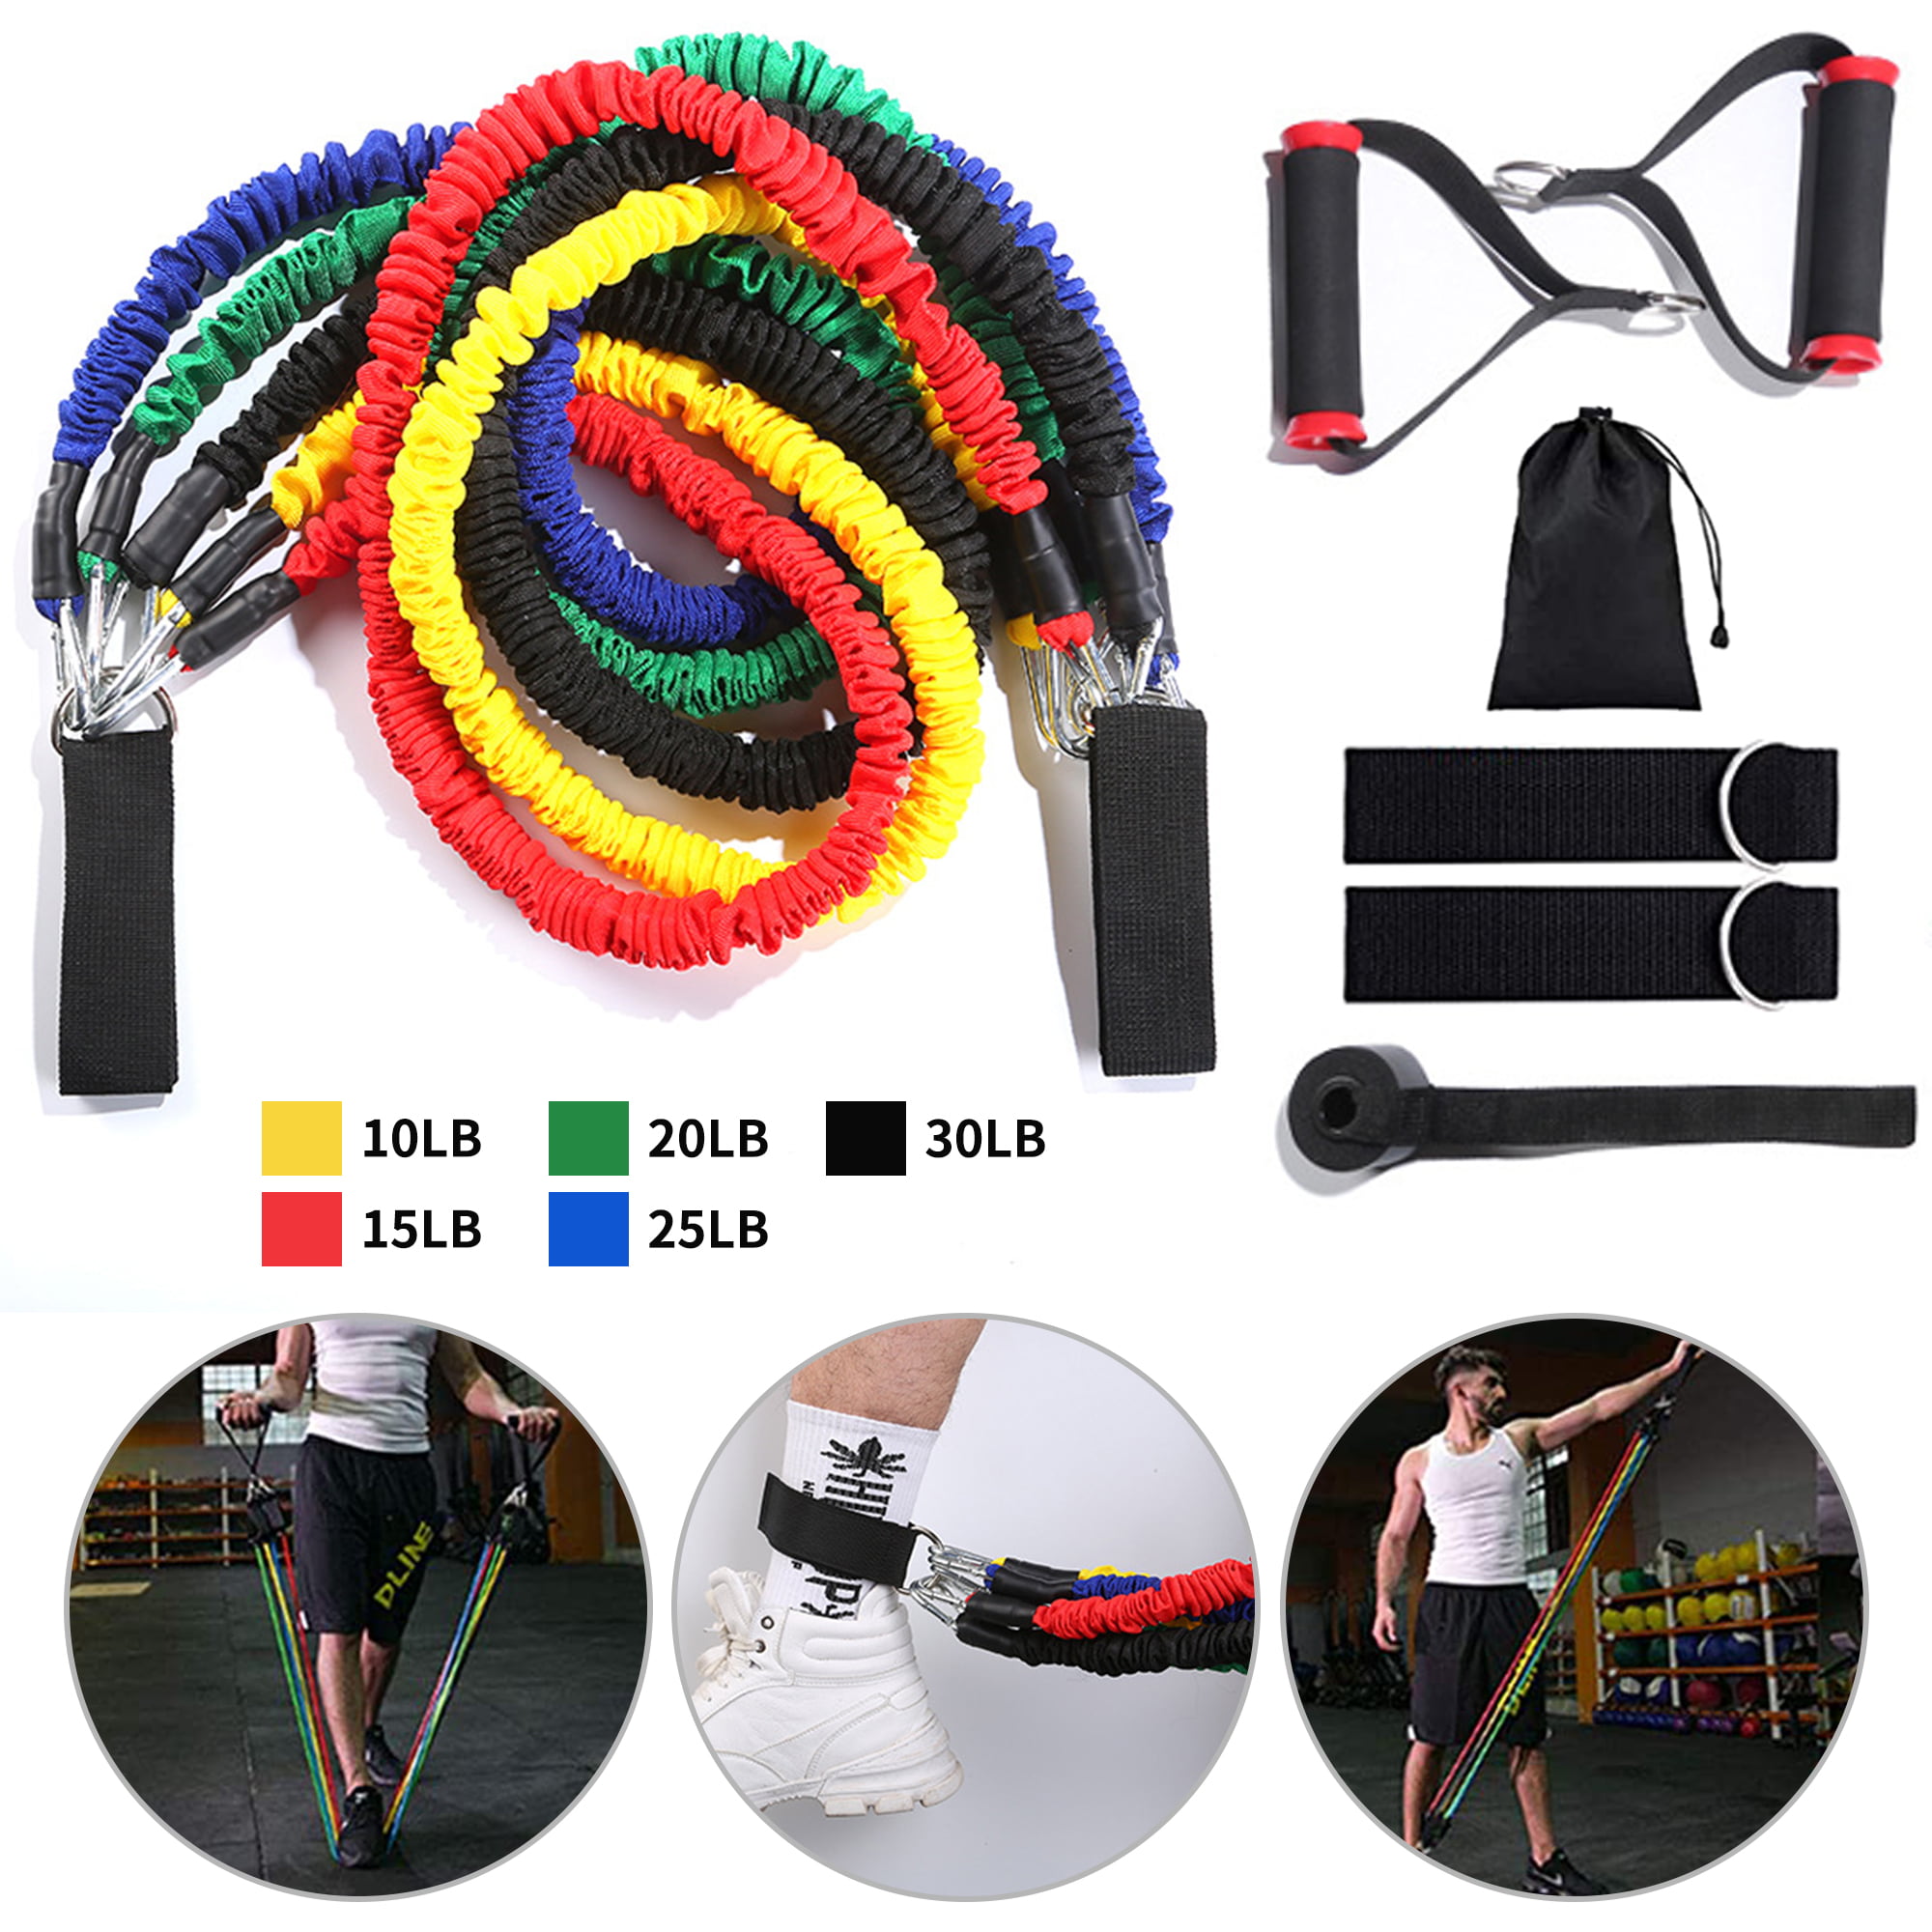 11pcs Resistance Band Rope FitnessTubes Cords Home Workout Training Crossfit 